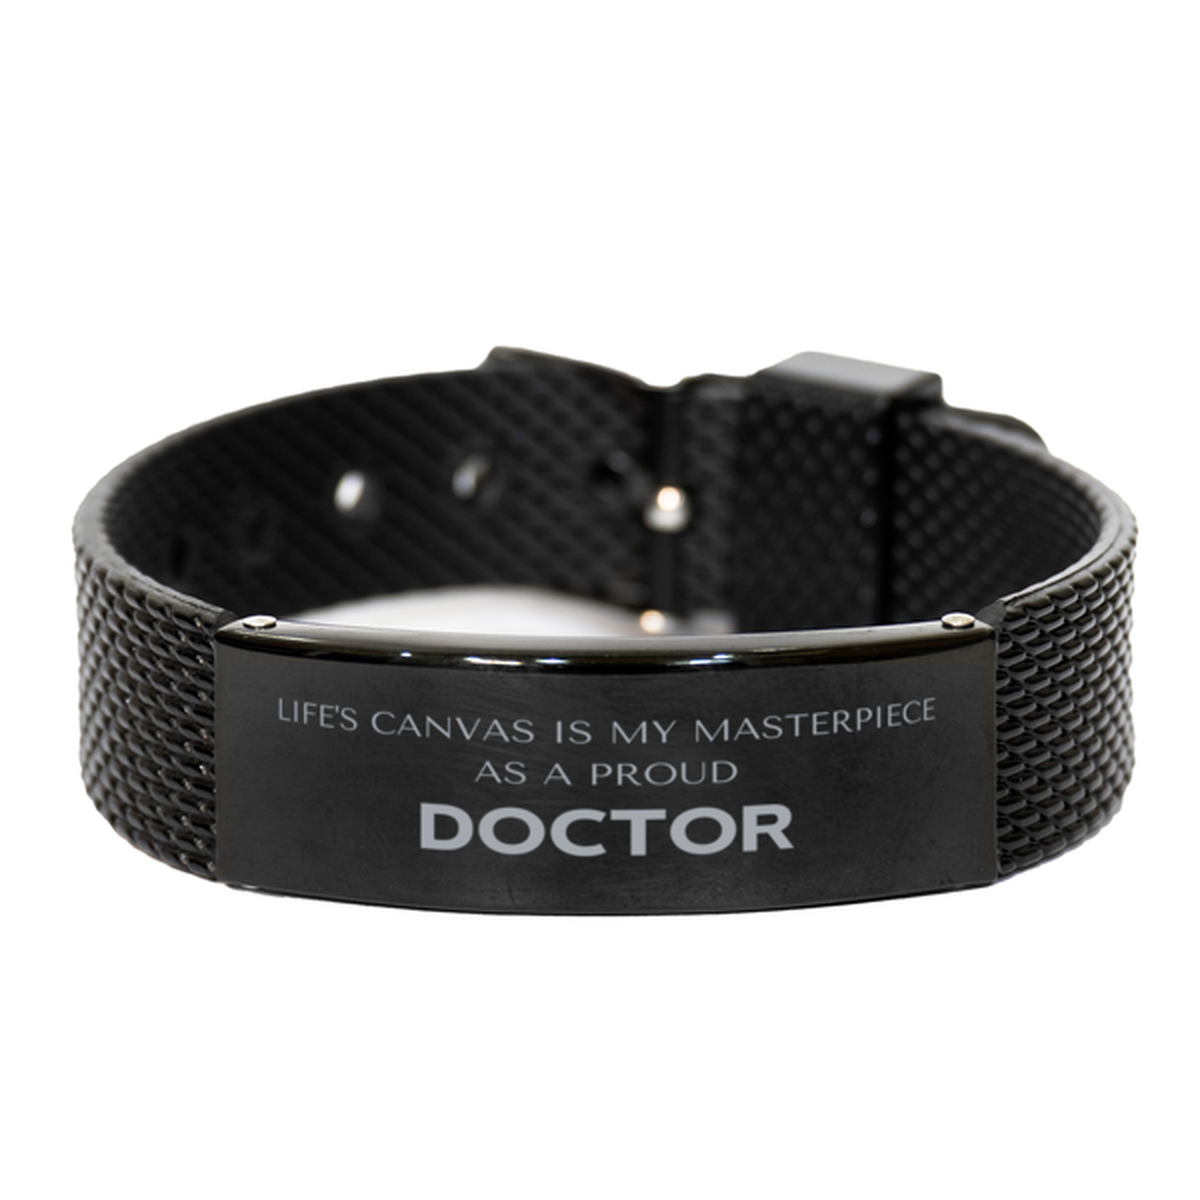 Proud Doctor Gifts, Life's canvas is my masterpiece, Epic Birthday Christmas Unique Black Shark Mesh Bracelet For Doctor, Coworkers, Men, Women, Friends